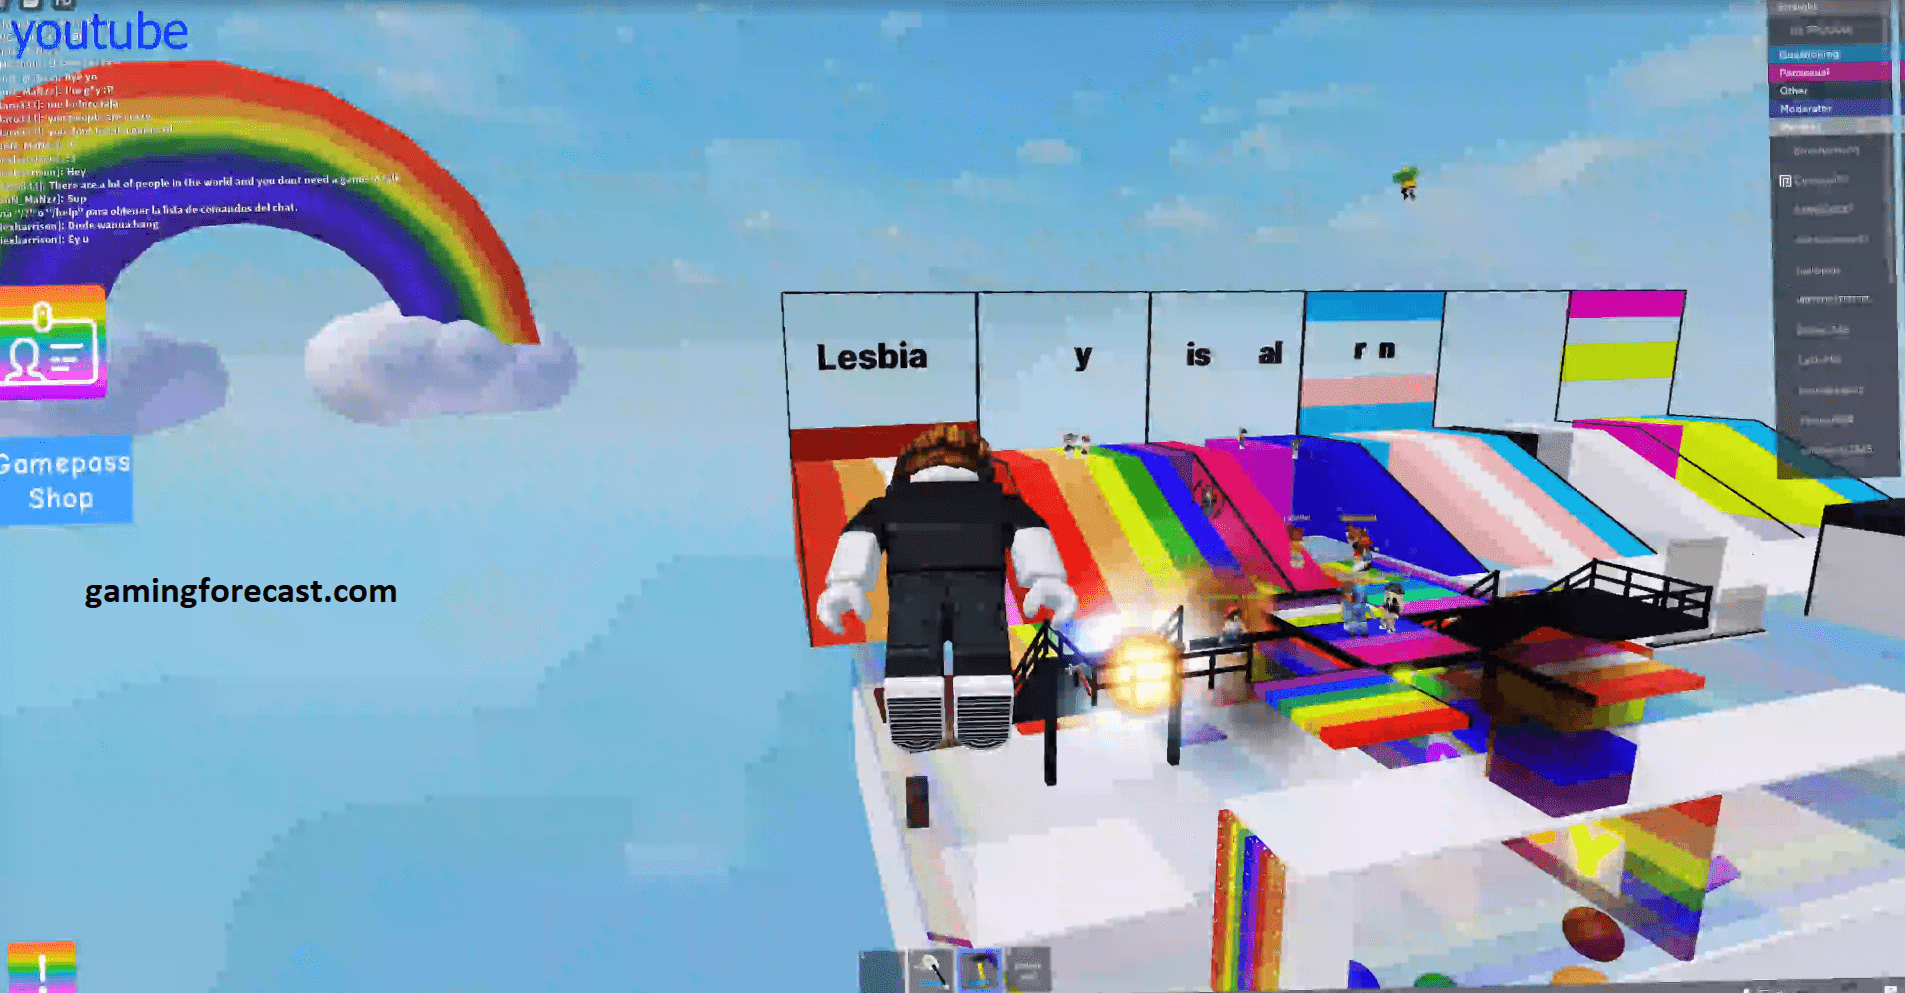 Roblox Hack Download Pc Destroy Lobby Fly Aimbot Scripts 2021 Gaming Forecast Download Free Online Game Hacks - roblox hacks download pc free